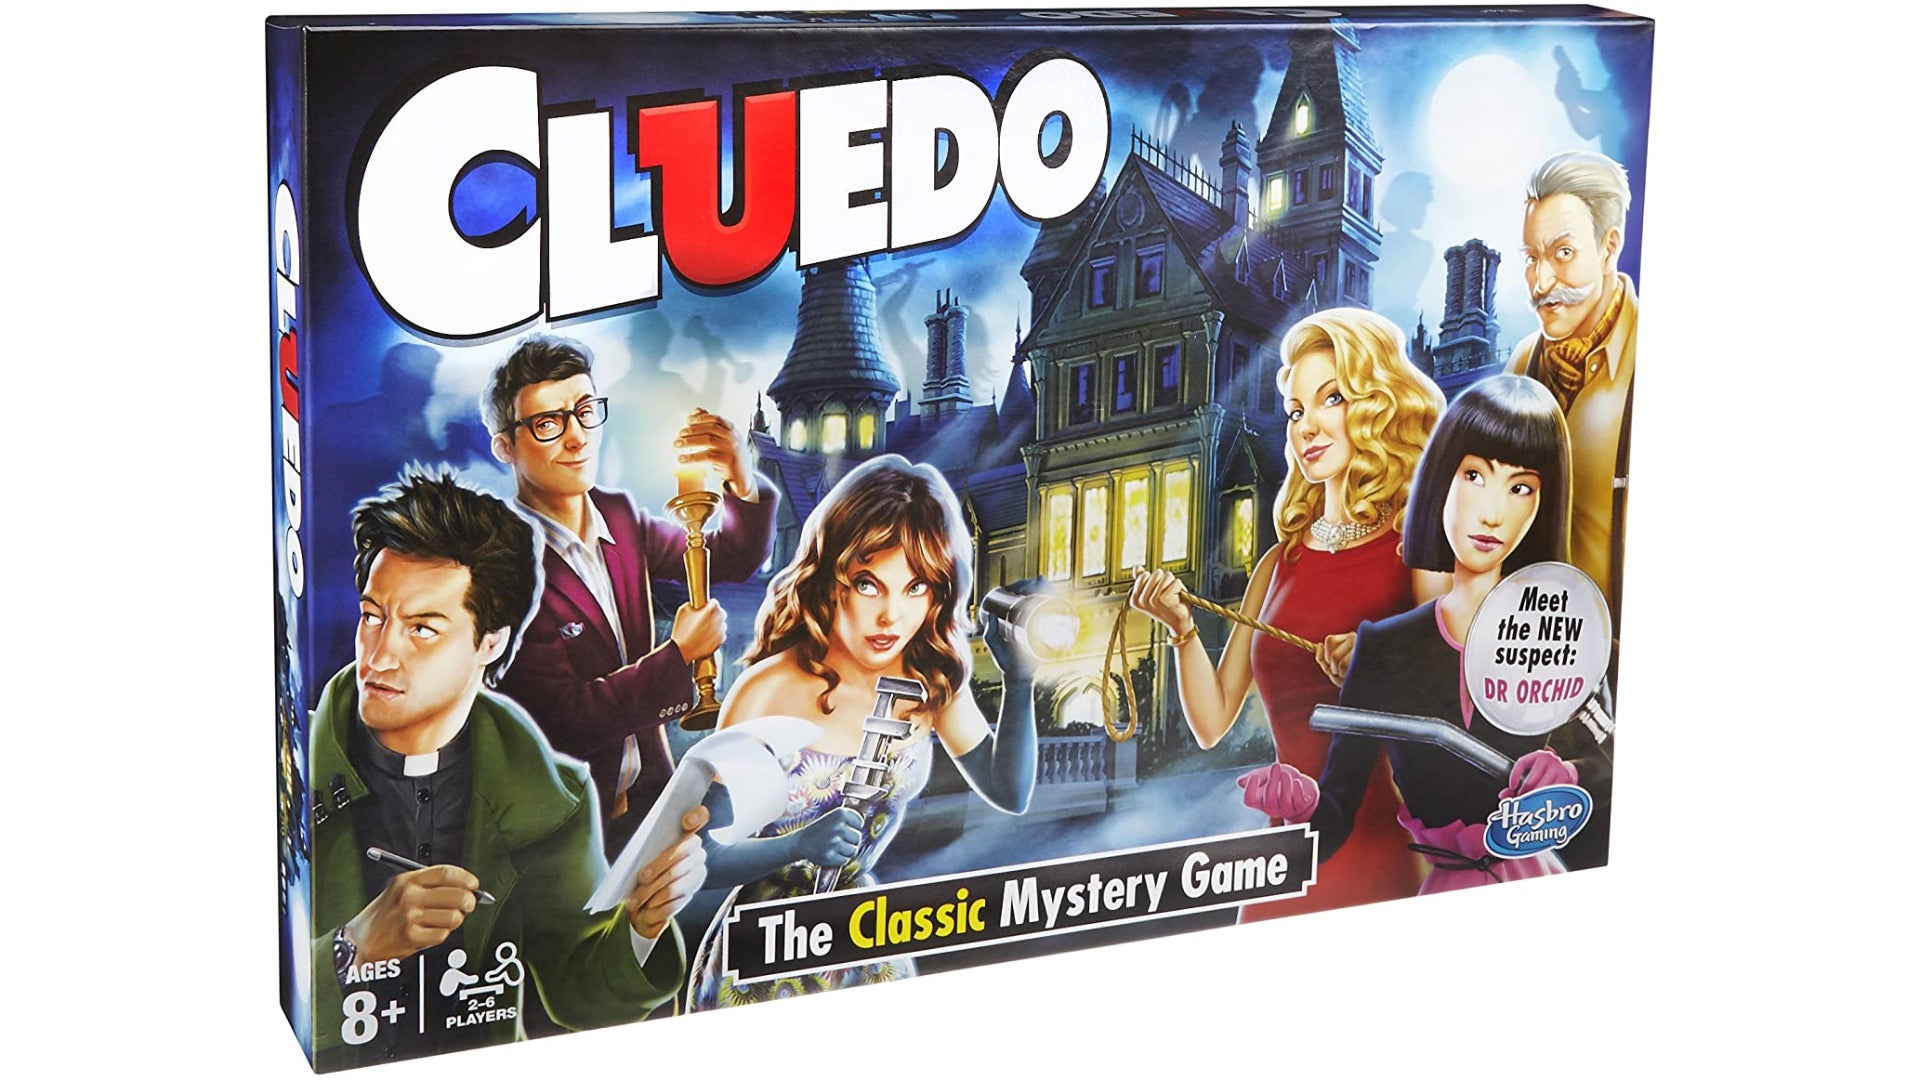 Image for The classic mystery game Cluedo is only £10 at Amazon